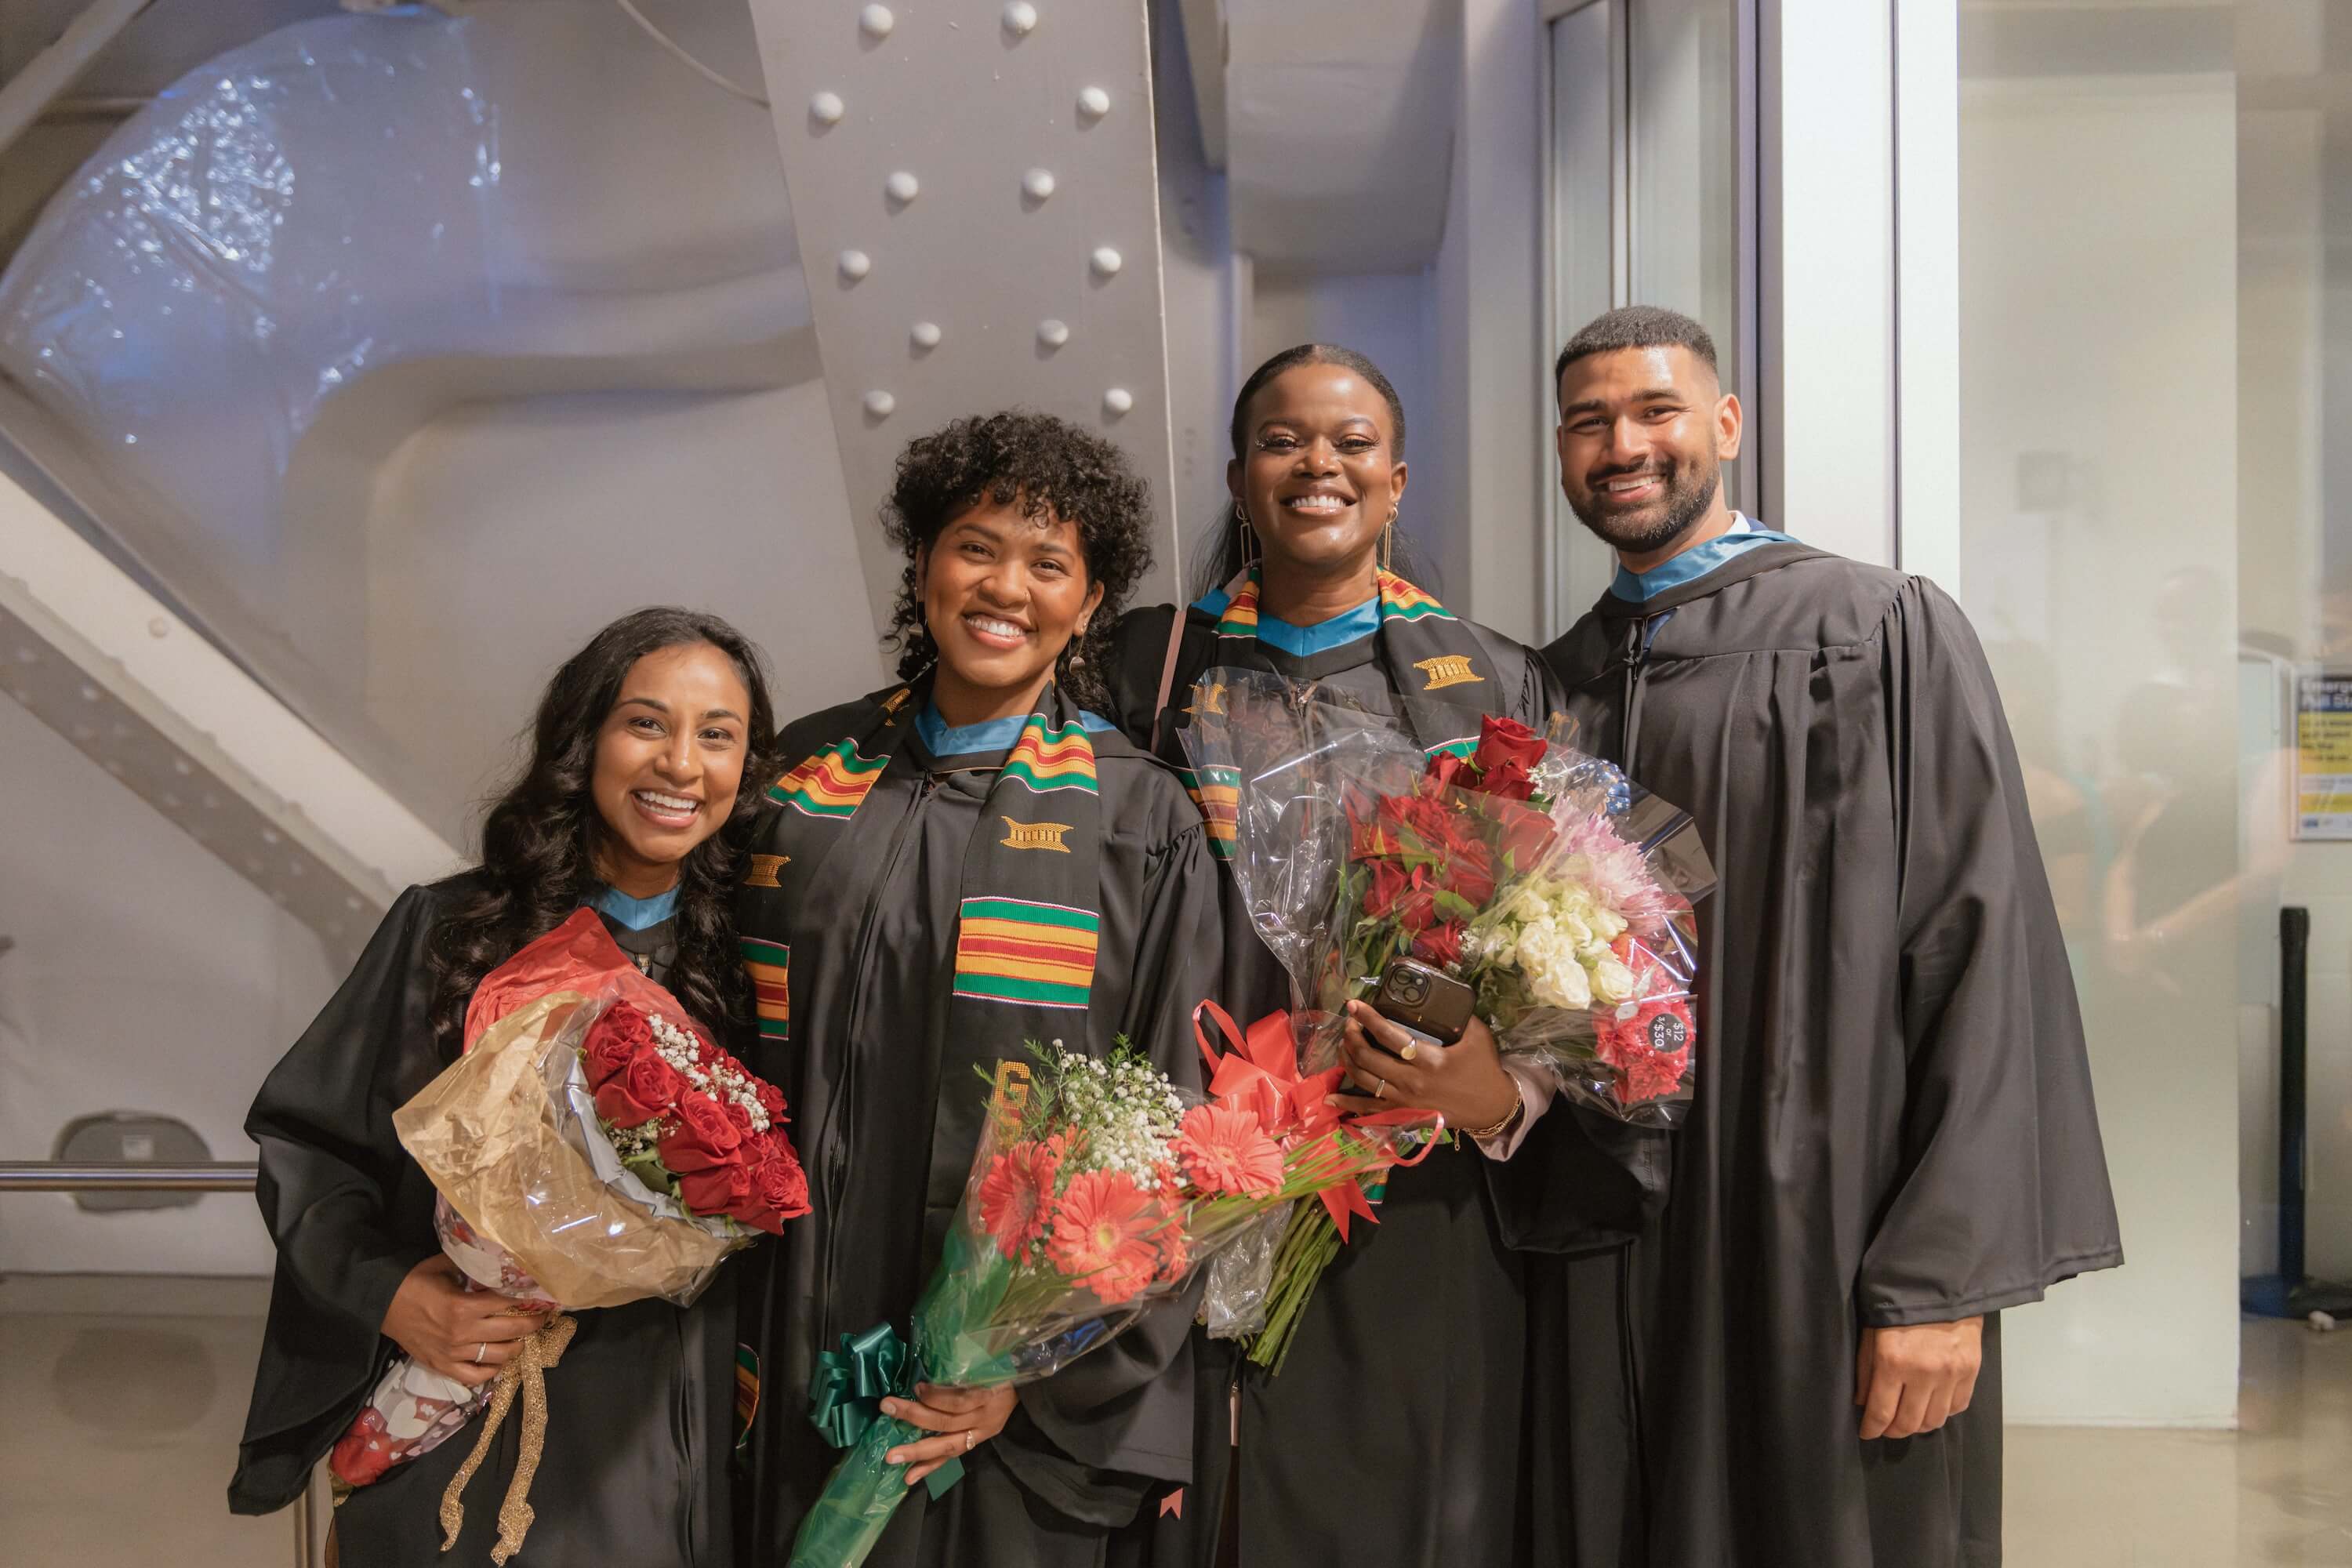 Four graduates pose with bouquets of flowers at Convocation.